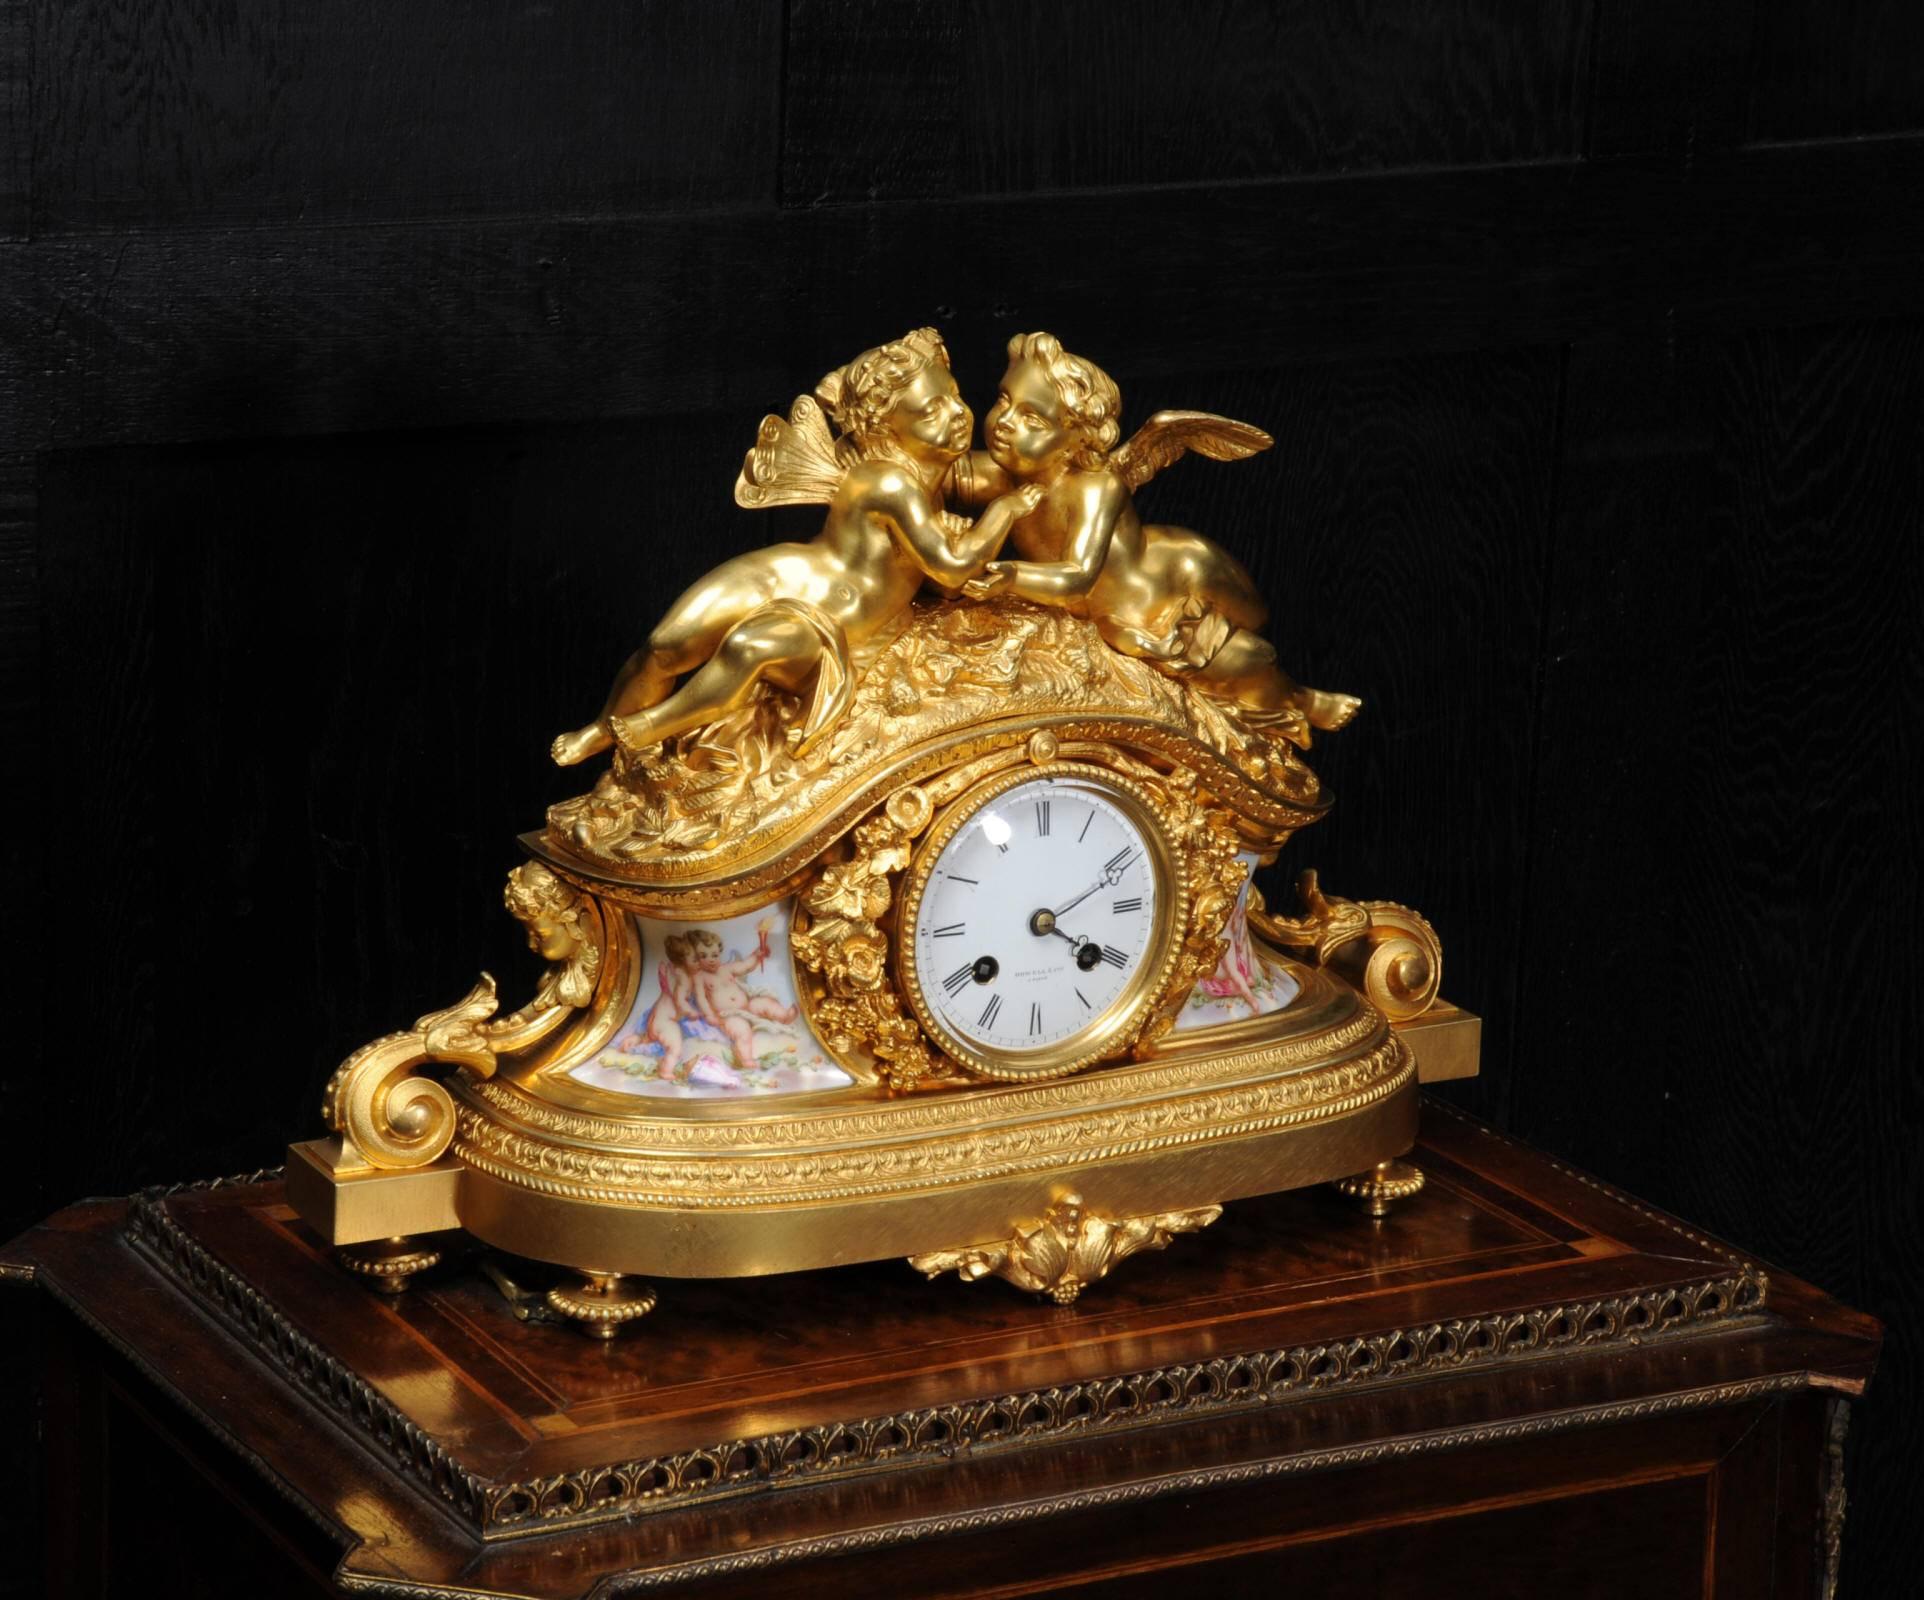 A fine and early clock featuring the most charming cherubs, modelled in fire gilded bronze (bronze doré). To the base are a pair of exquisitely painted porcelain panels also featuring cherubs. The clock was retailed by the famous Howell James and